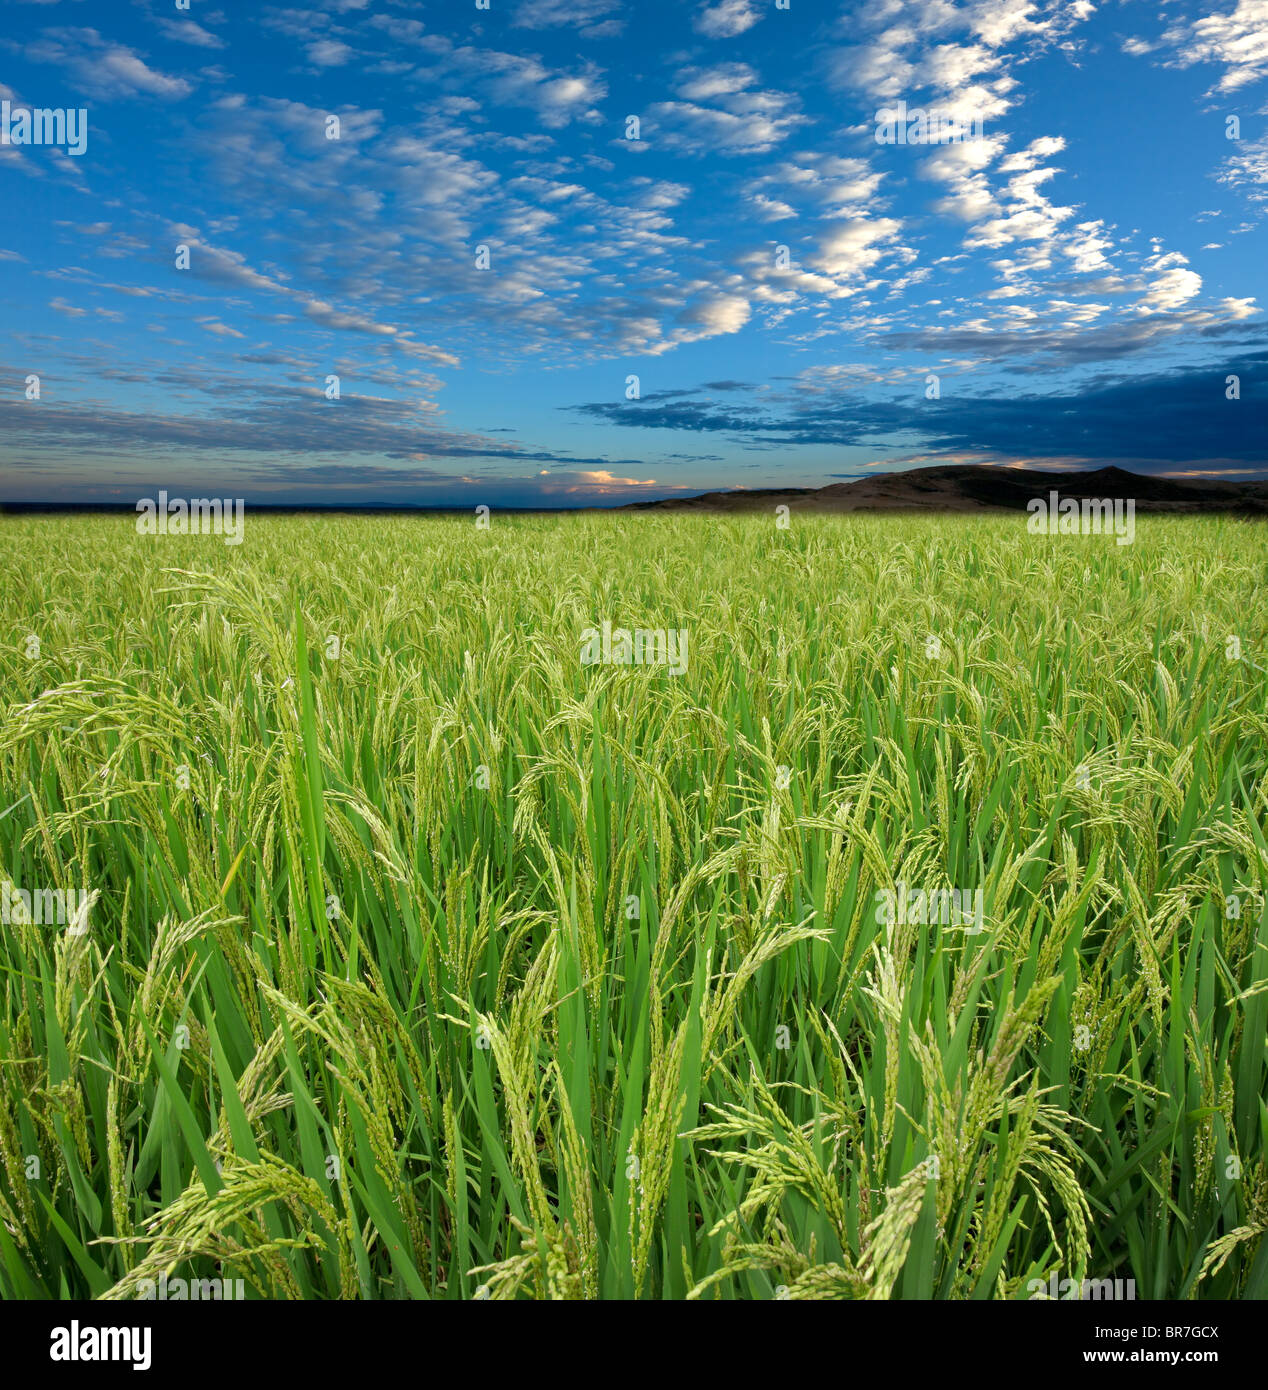 Lush green rice field with a blue sky and clouds Stock Photo